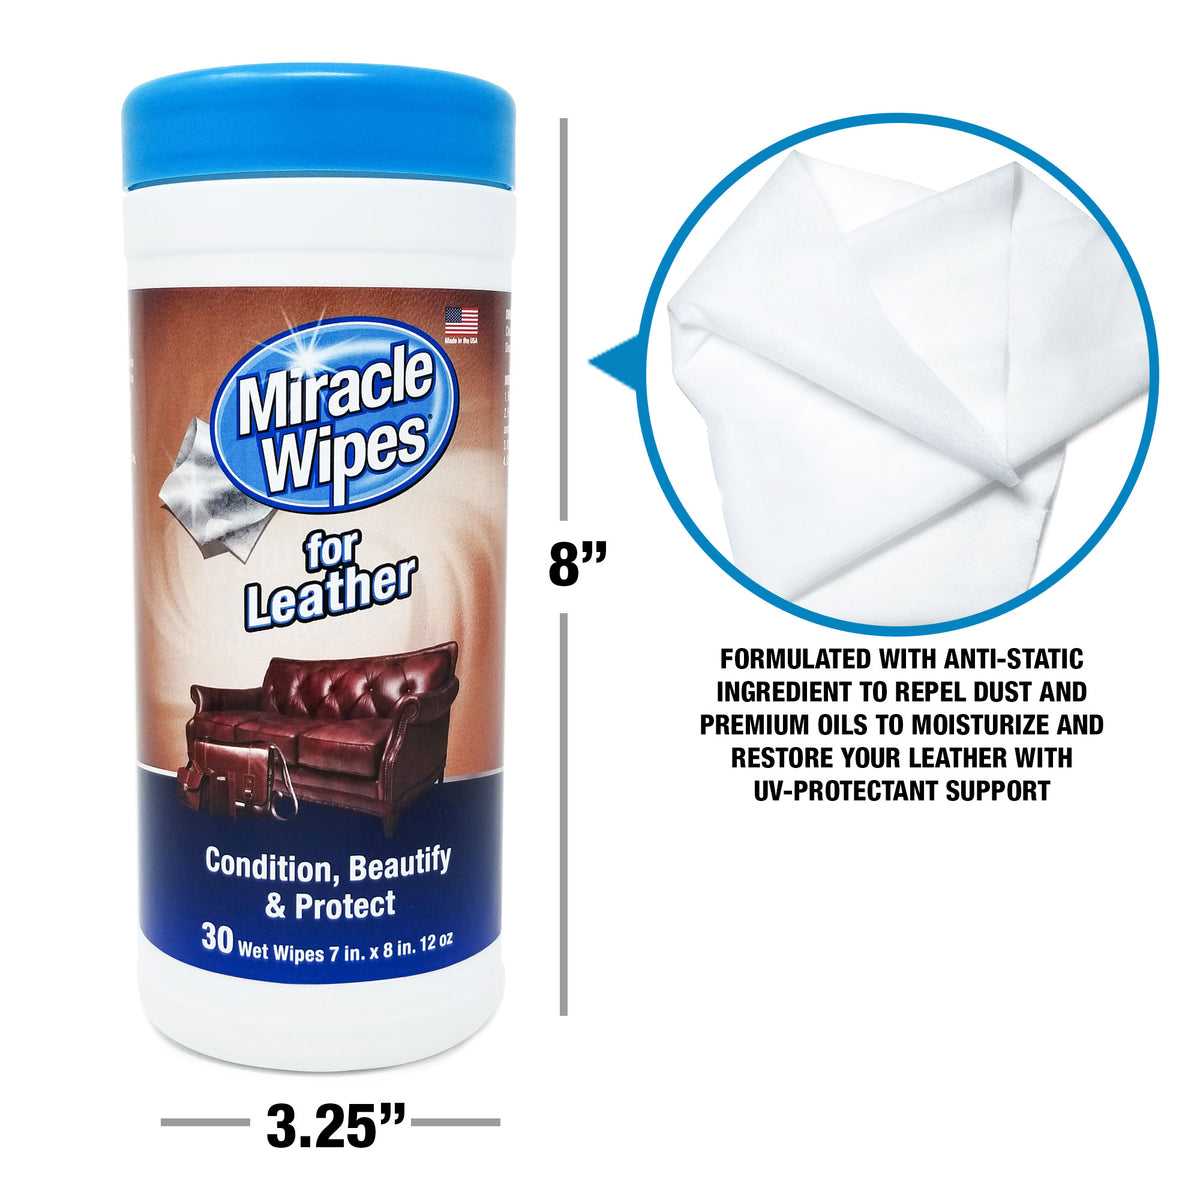 MiracleWipes for Leather – Miracle Brands